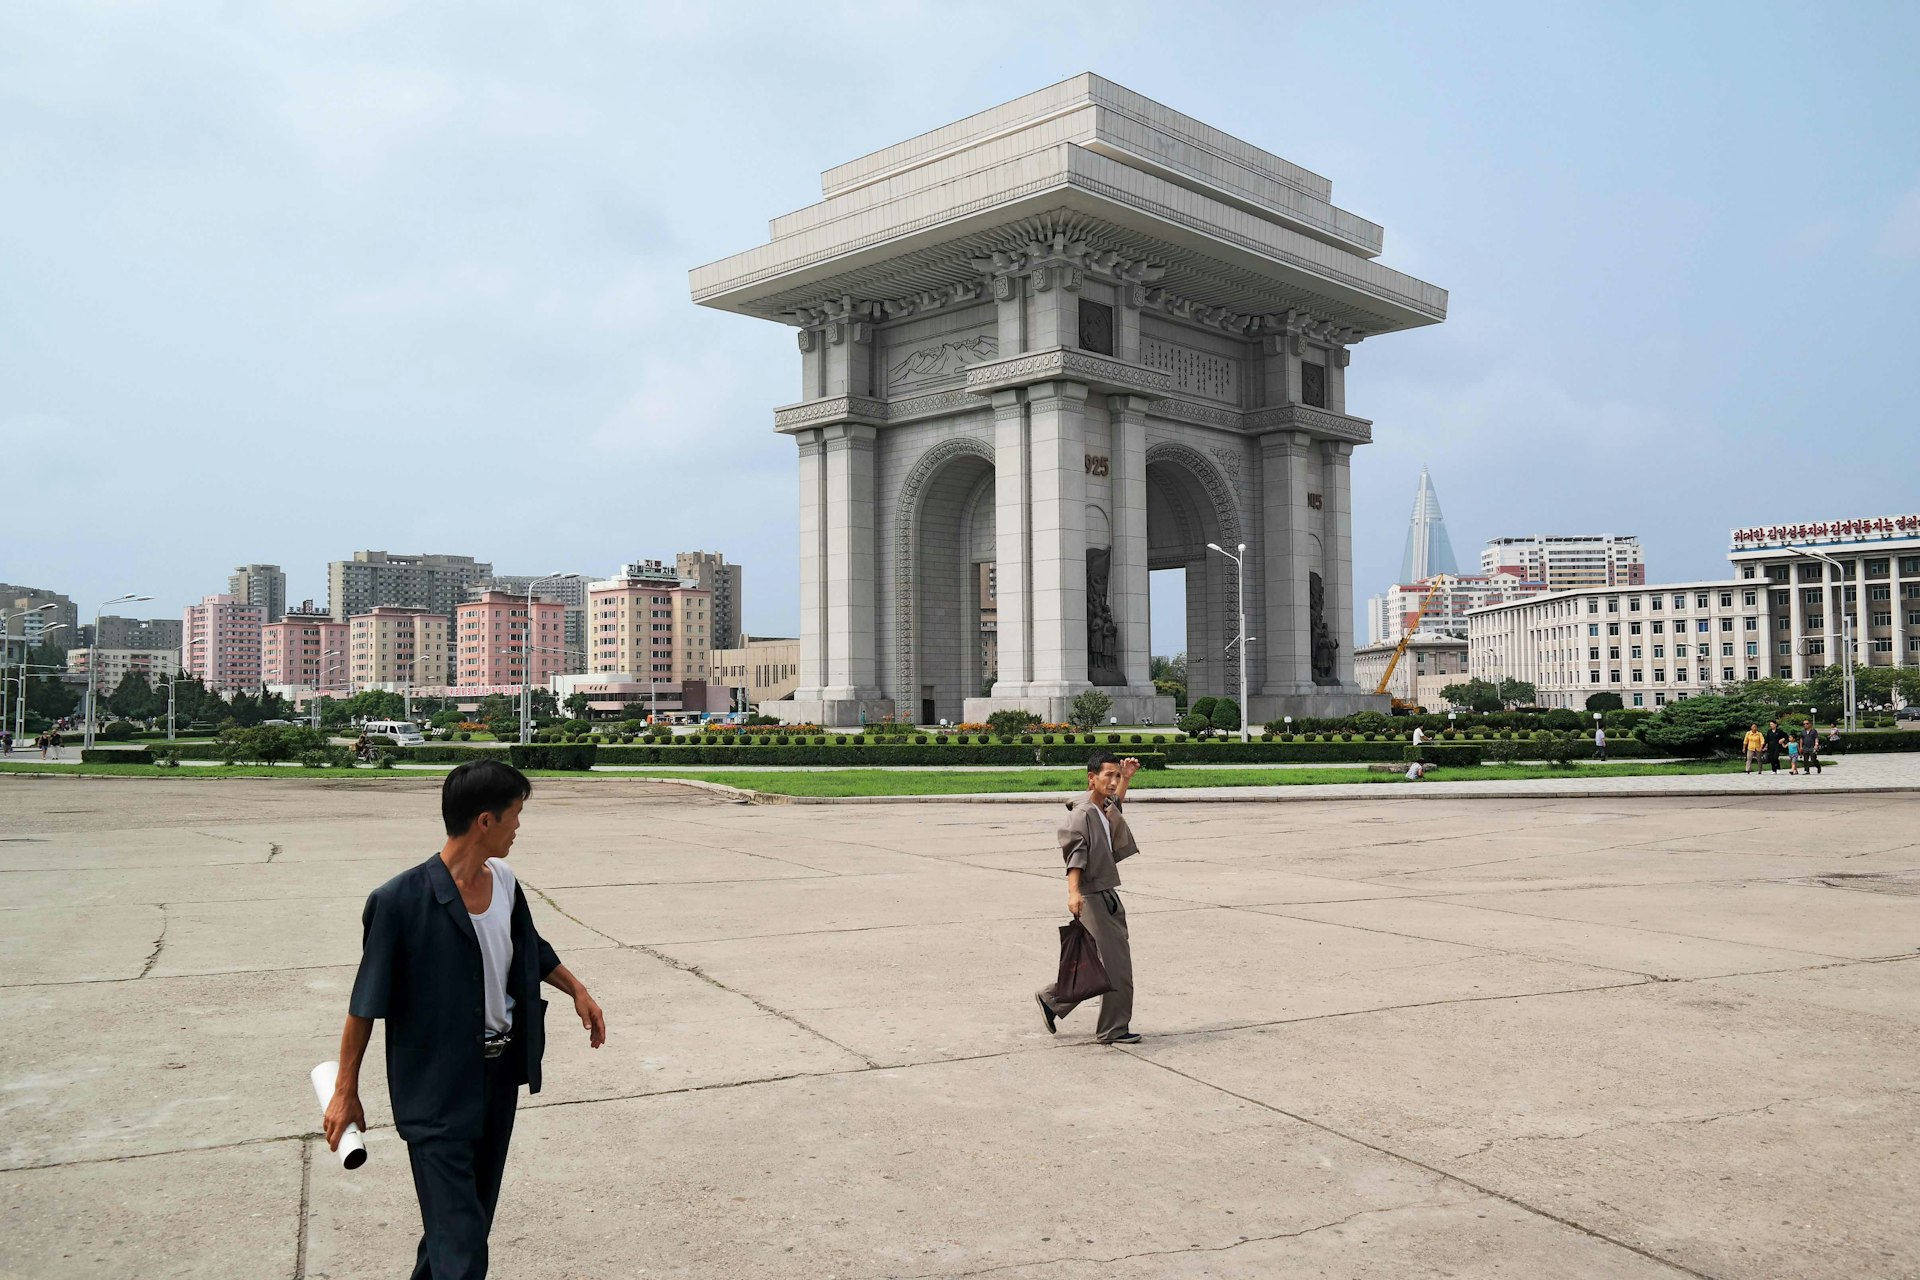 The Arch of Triumph (modelled on the Arc de Triomphe in Paris, but reputedly 10 metres taller because of its great triple-decker stack of rooftops) is built from 25,550 blocks of white granite, representing the number of days of Kim Il Sung’s life on his 70th birthday, when the structure was unveiled in 1982. It was built on the site where Kim Il Sung entered Pyongyang in 1945 to be greeted by cheering Koreans, marking the end of the Japanese occupation and the beginning of socialism.